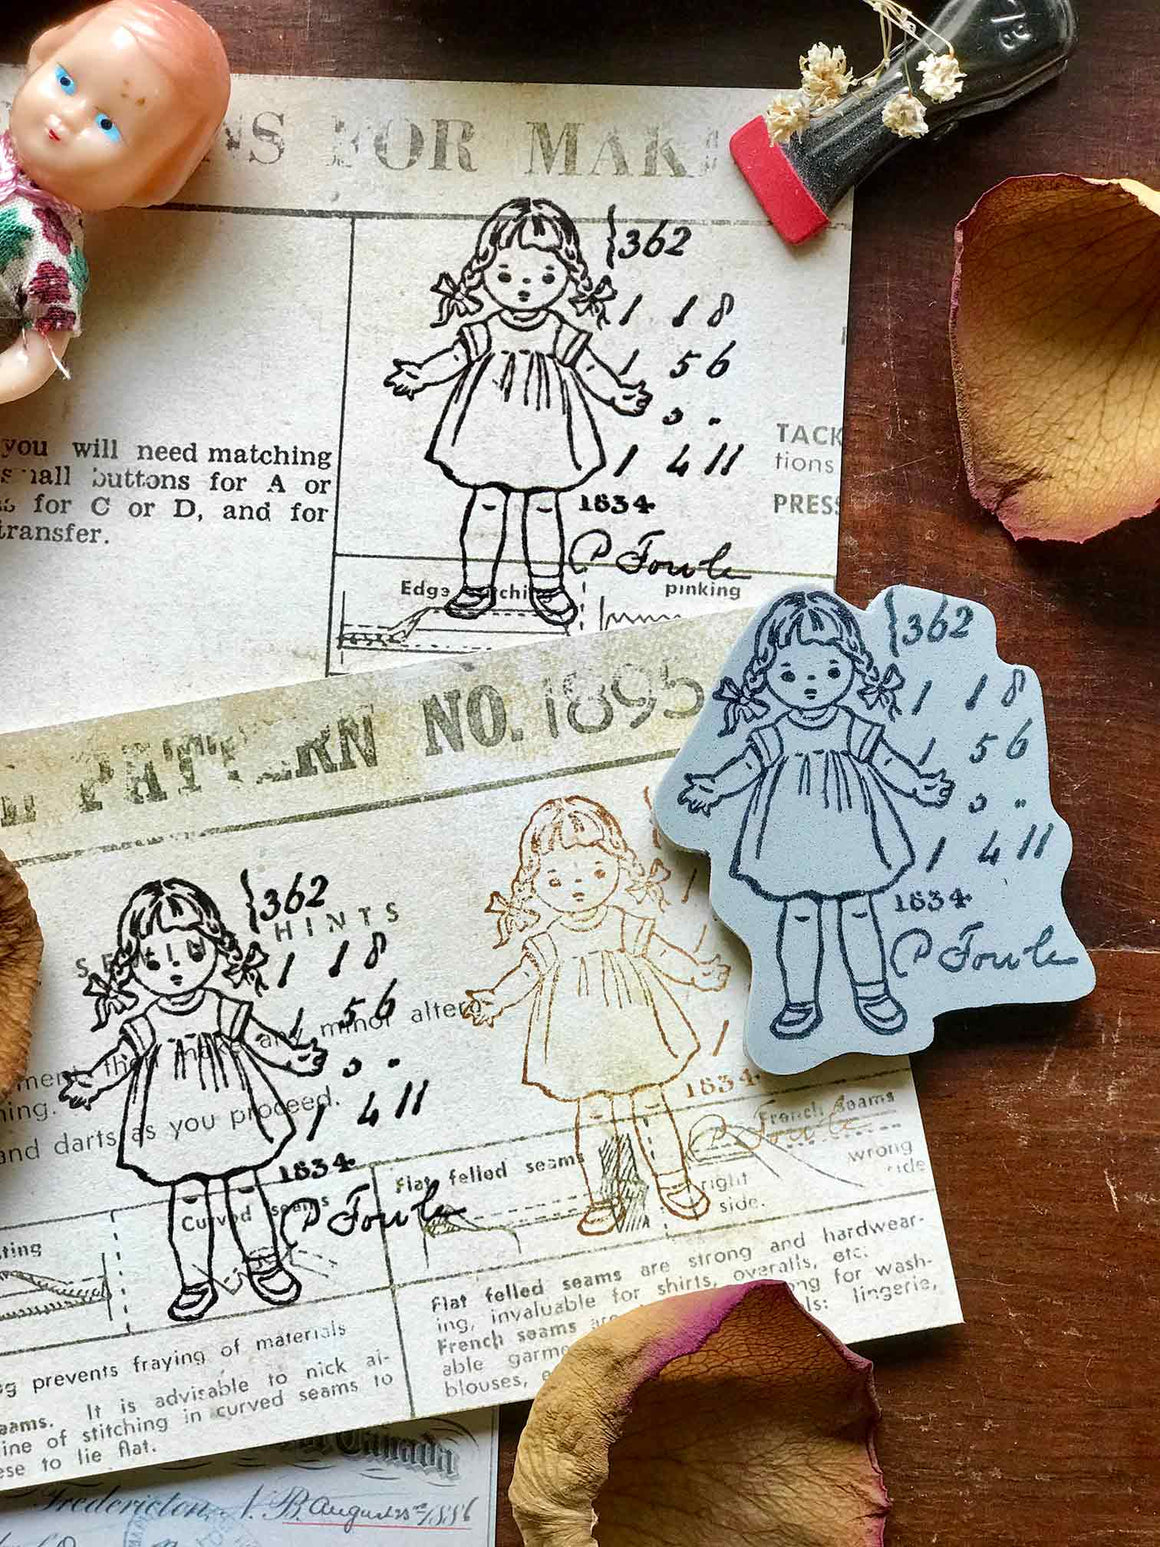 Pre-order 'What A Dolly' Rubber Stamp by Mic Moc (なんて素敵な人形でしょう) from micmoc.com